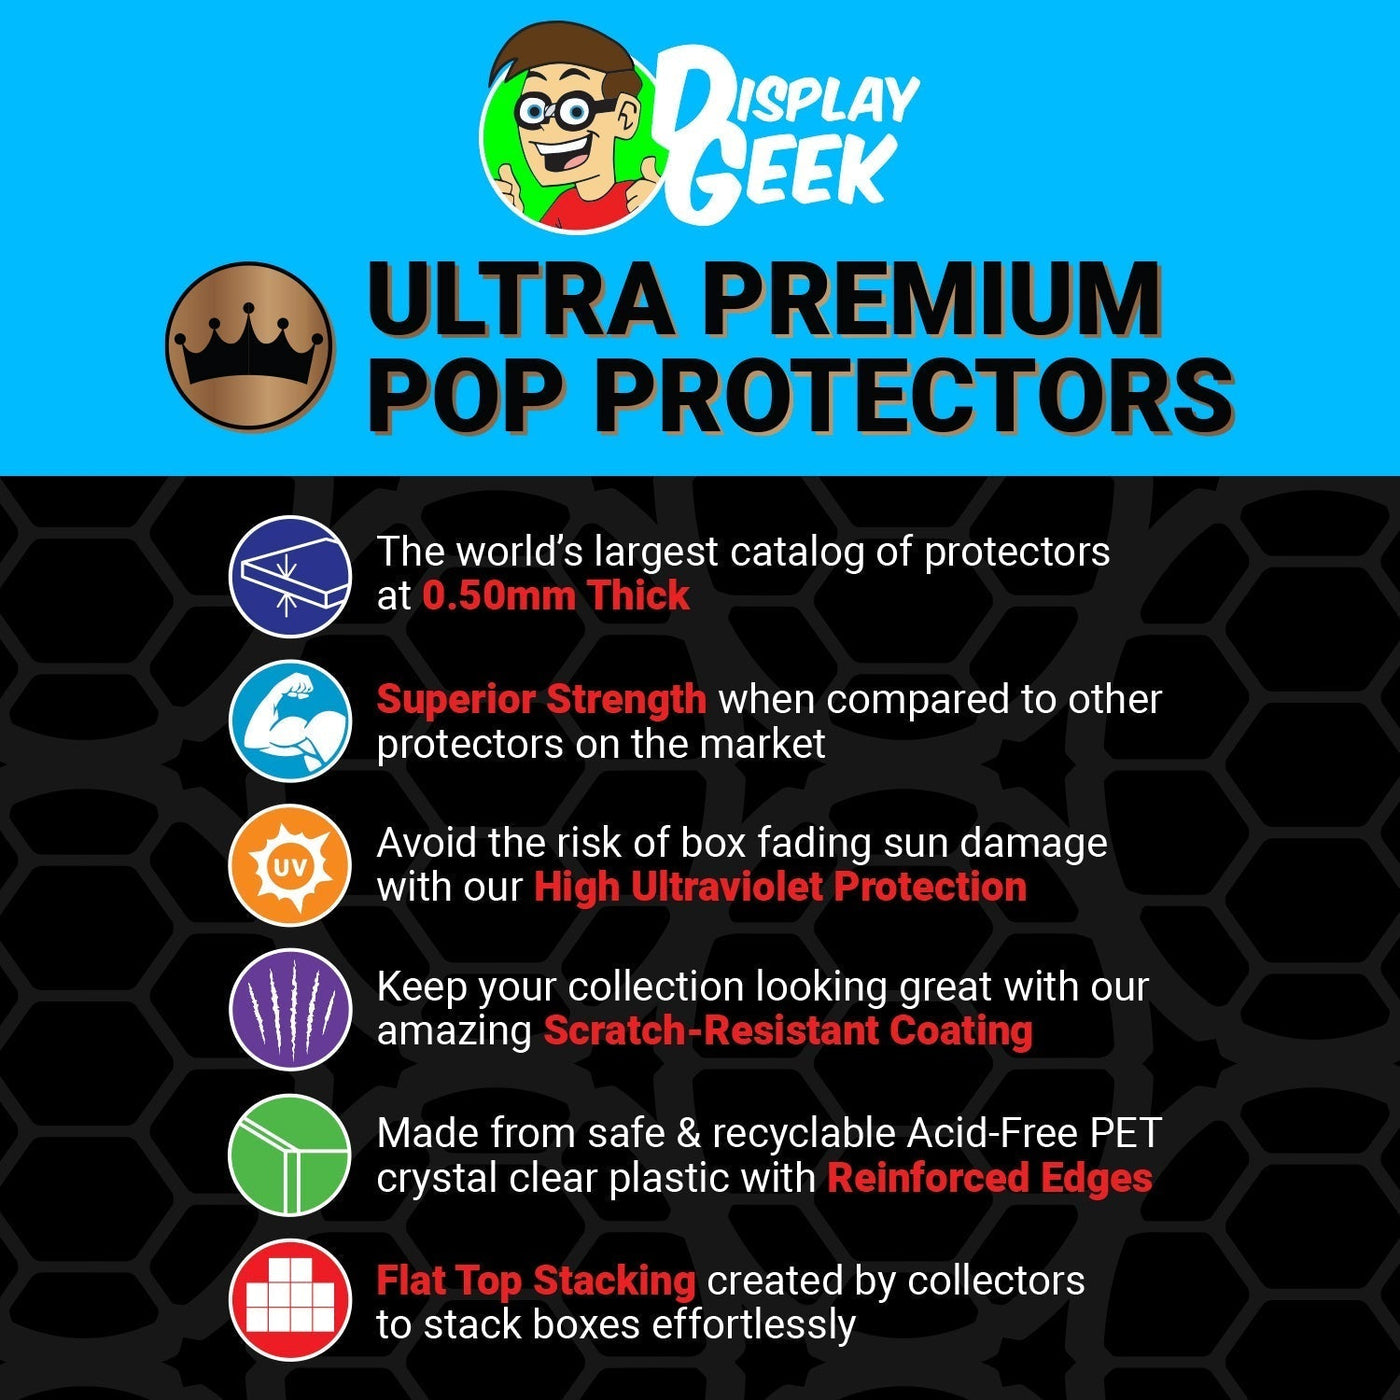 Pop Protector for 3 Pack Kingdom Hearts Sora, Goofy & Donald Tron Funko Pop on The Protector Guide App by Display Geek